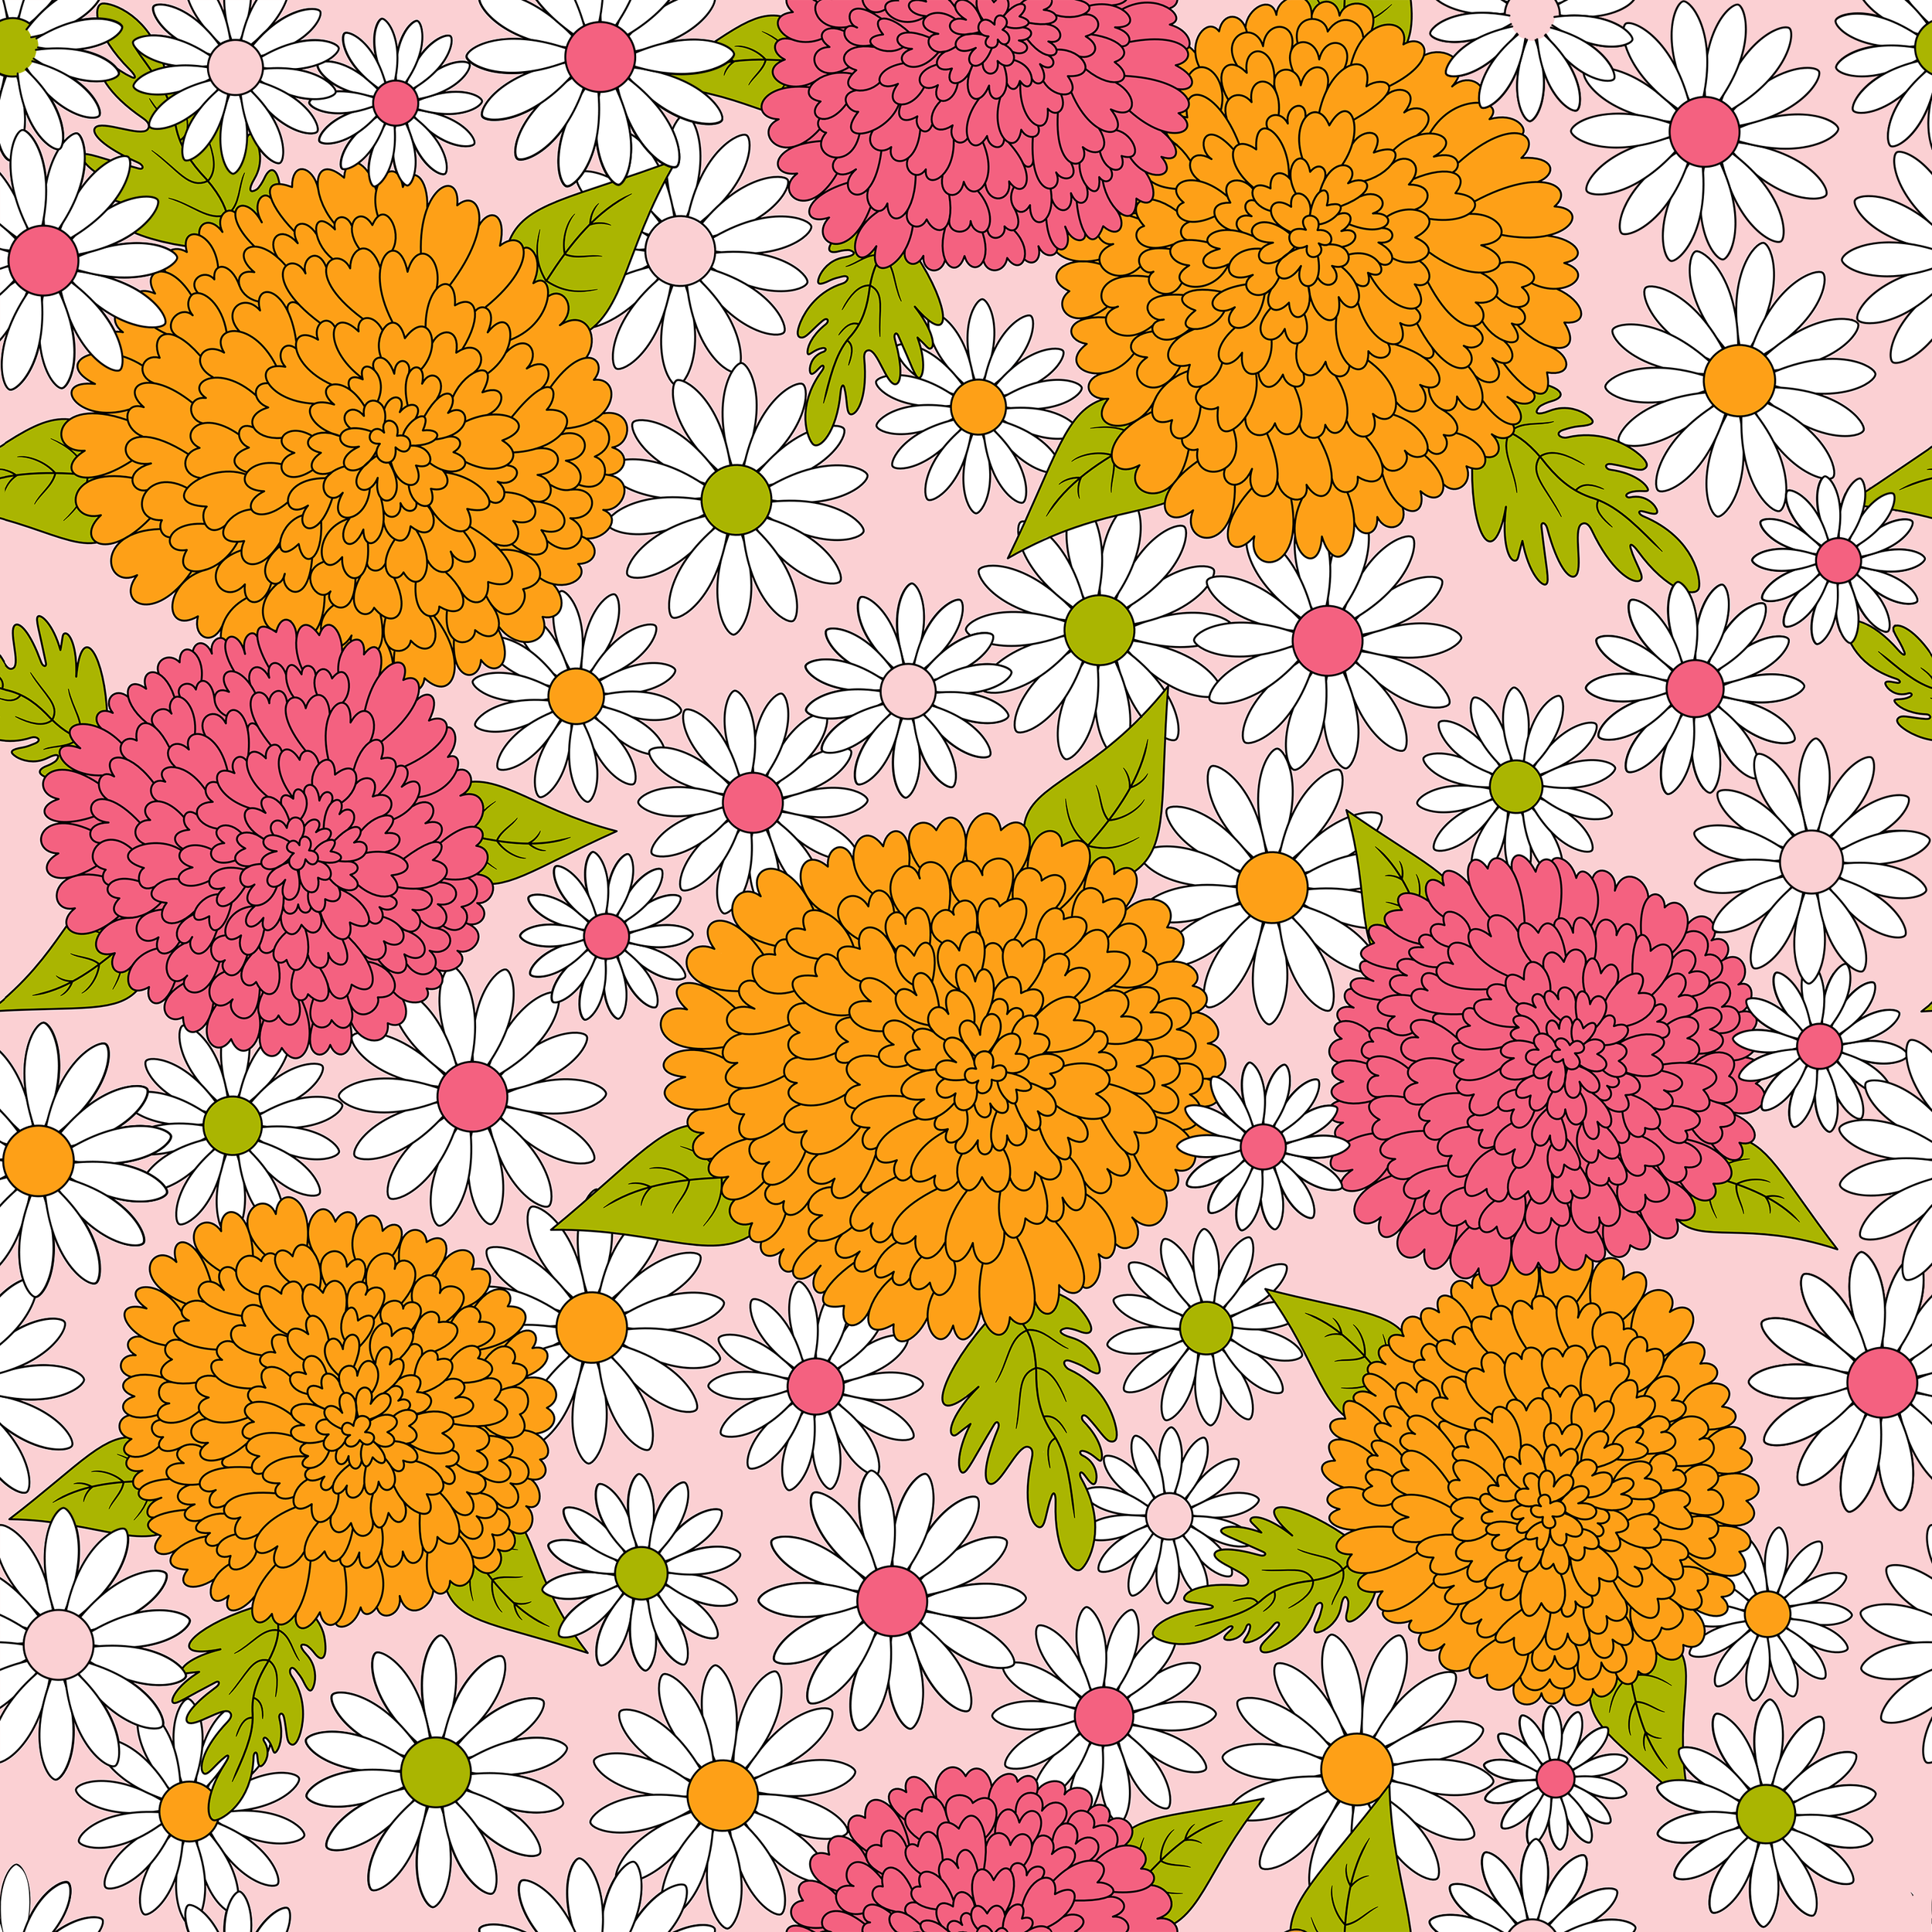 zinnias & daisies pink colorway final v2 150dpi.png